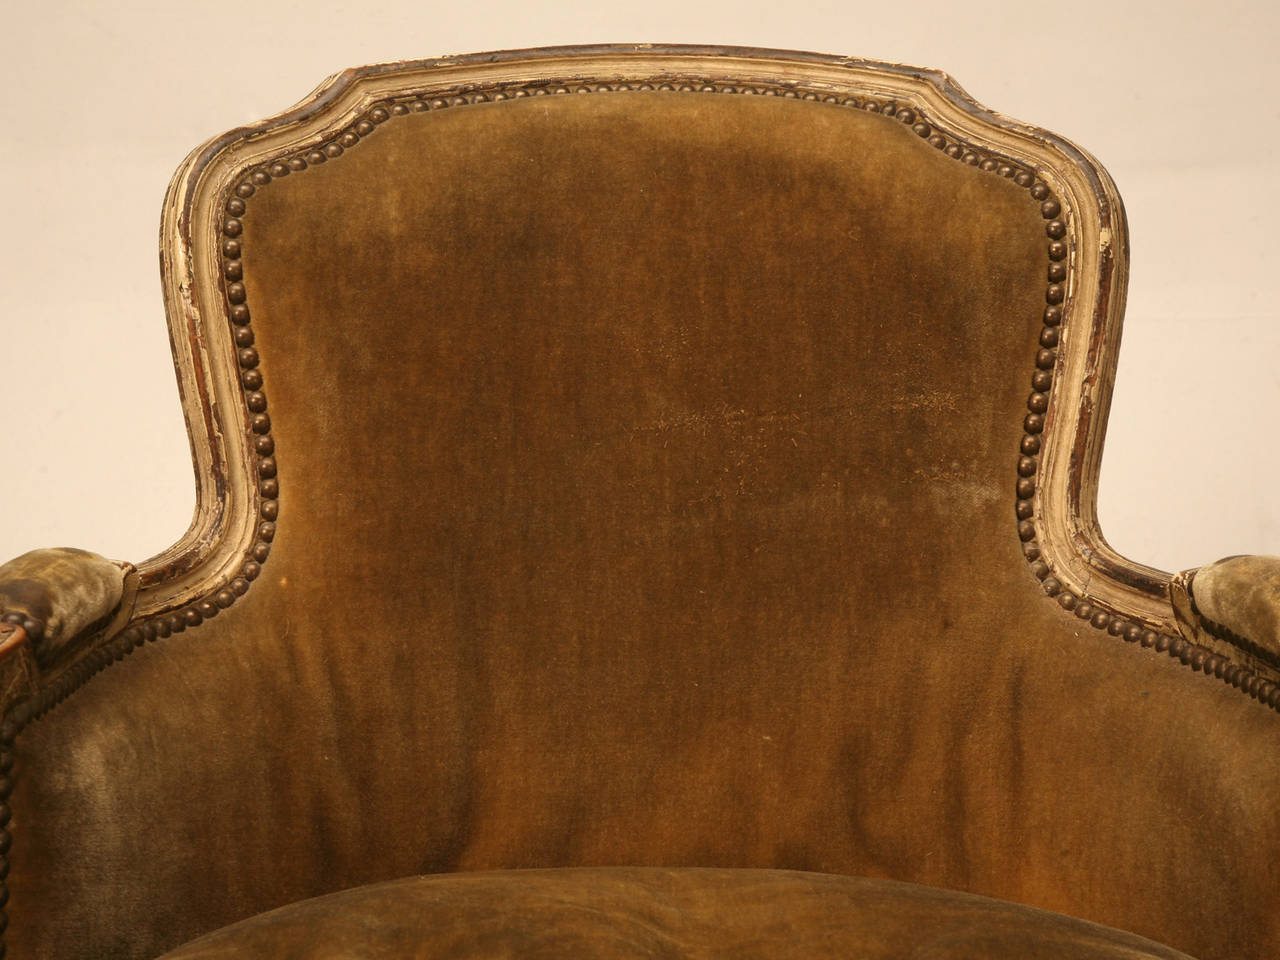 This is a very old French bergere chair in great old paint, that no one has touched for a long time. There is no real way to determine if the chair was born this way, but if it wasn't, it certainly was painted over 100 years ago. 

The expert at